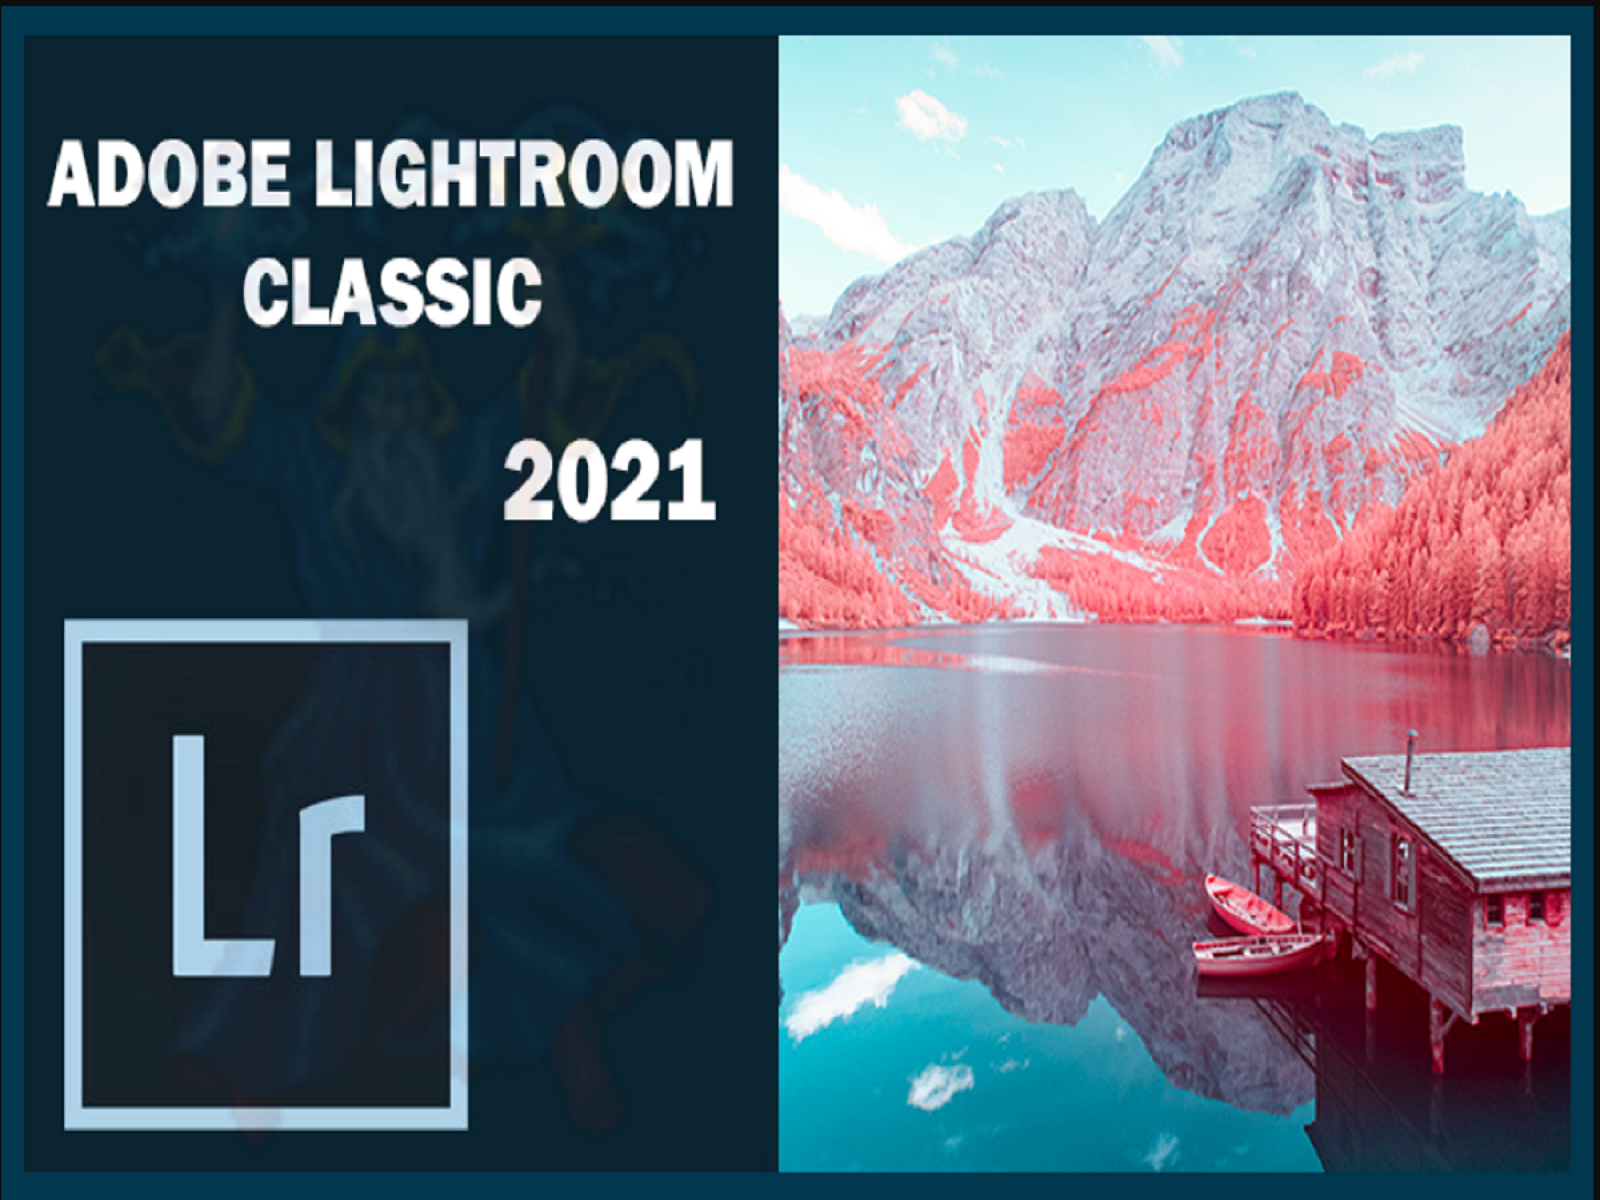 ⭐ Adobe Lightroom Classic 2021 Lifetime Full Version ⭐ Lifetime Activation for Windows / Mac ⭐Preactivated